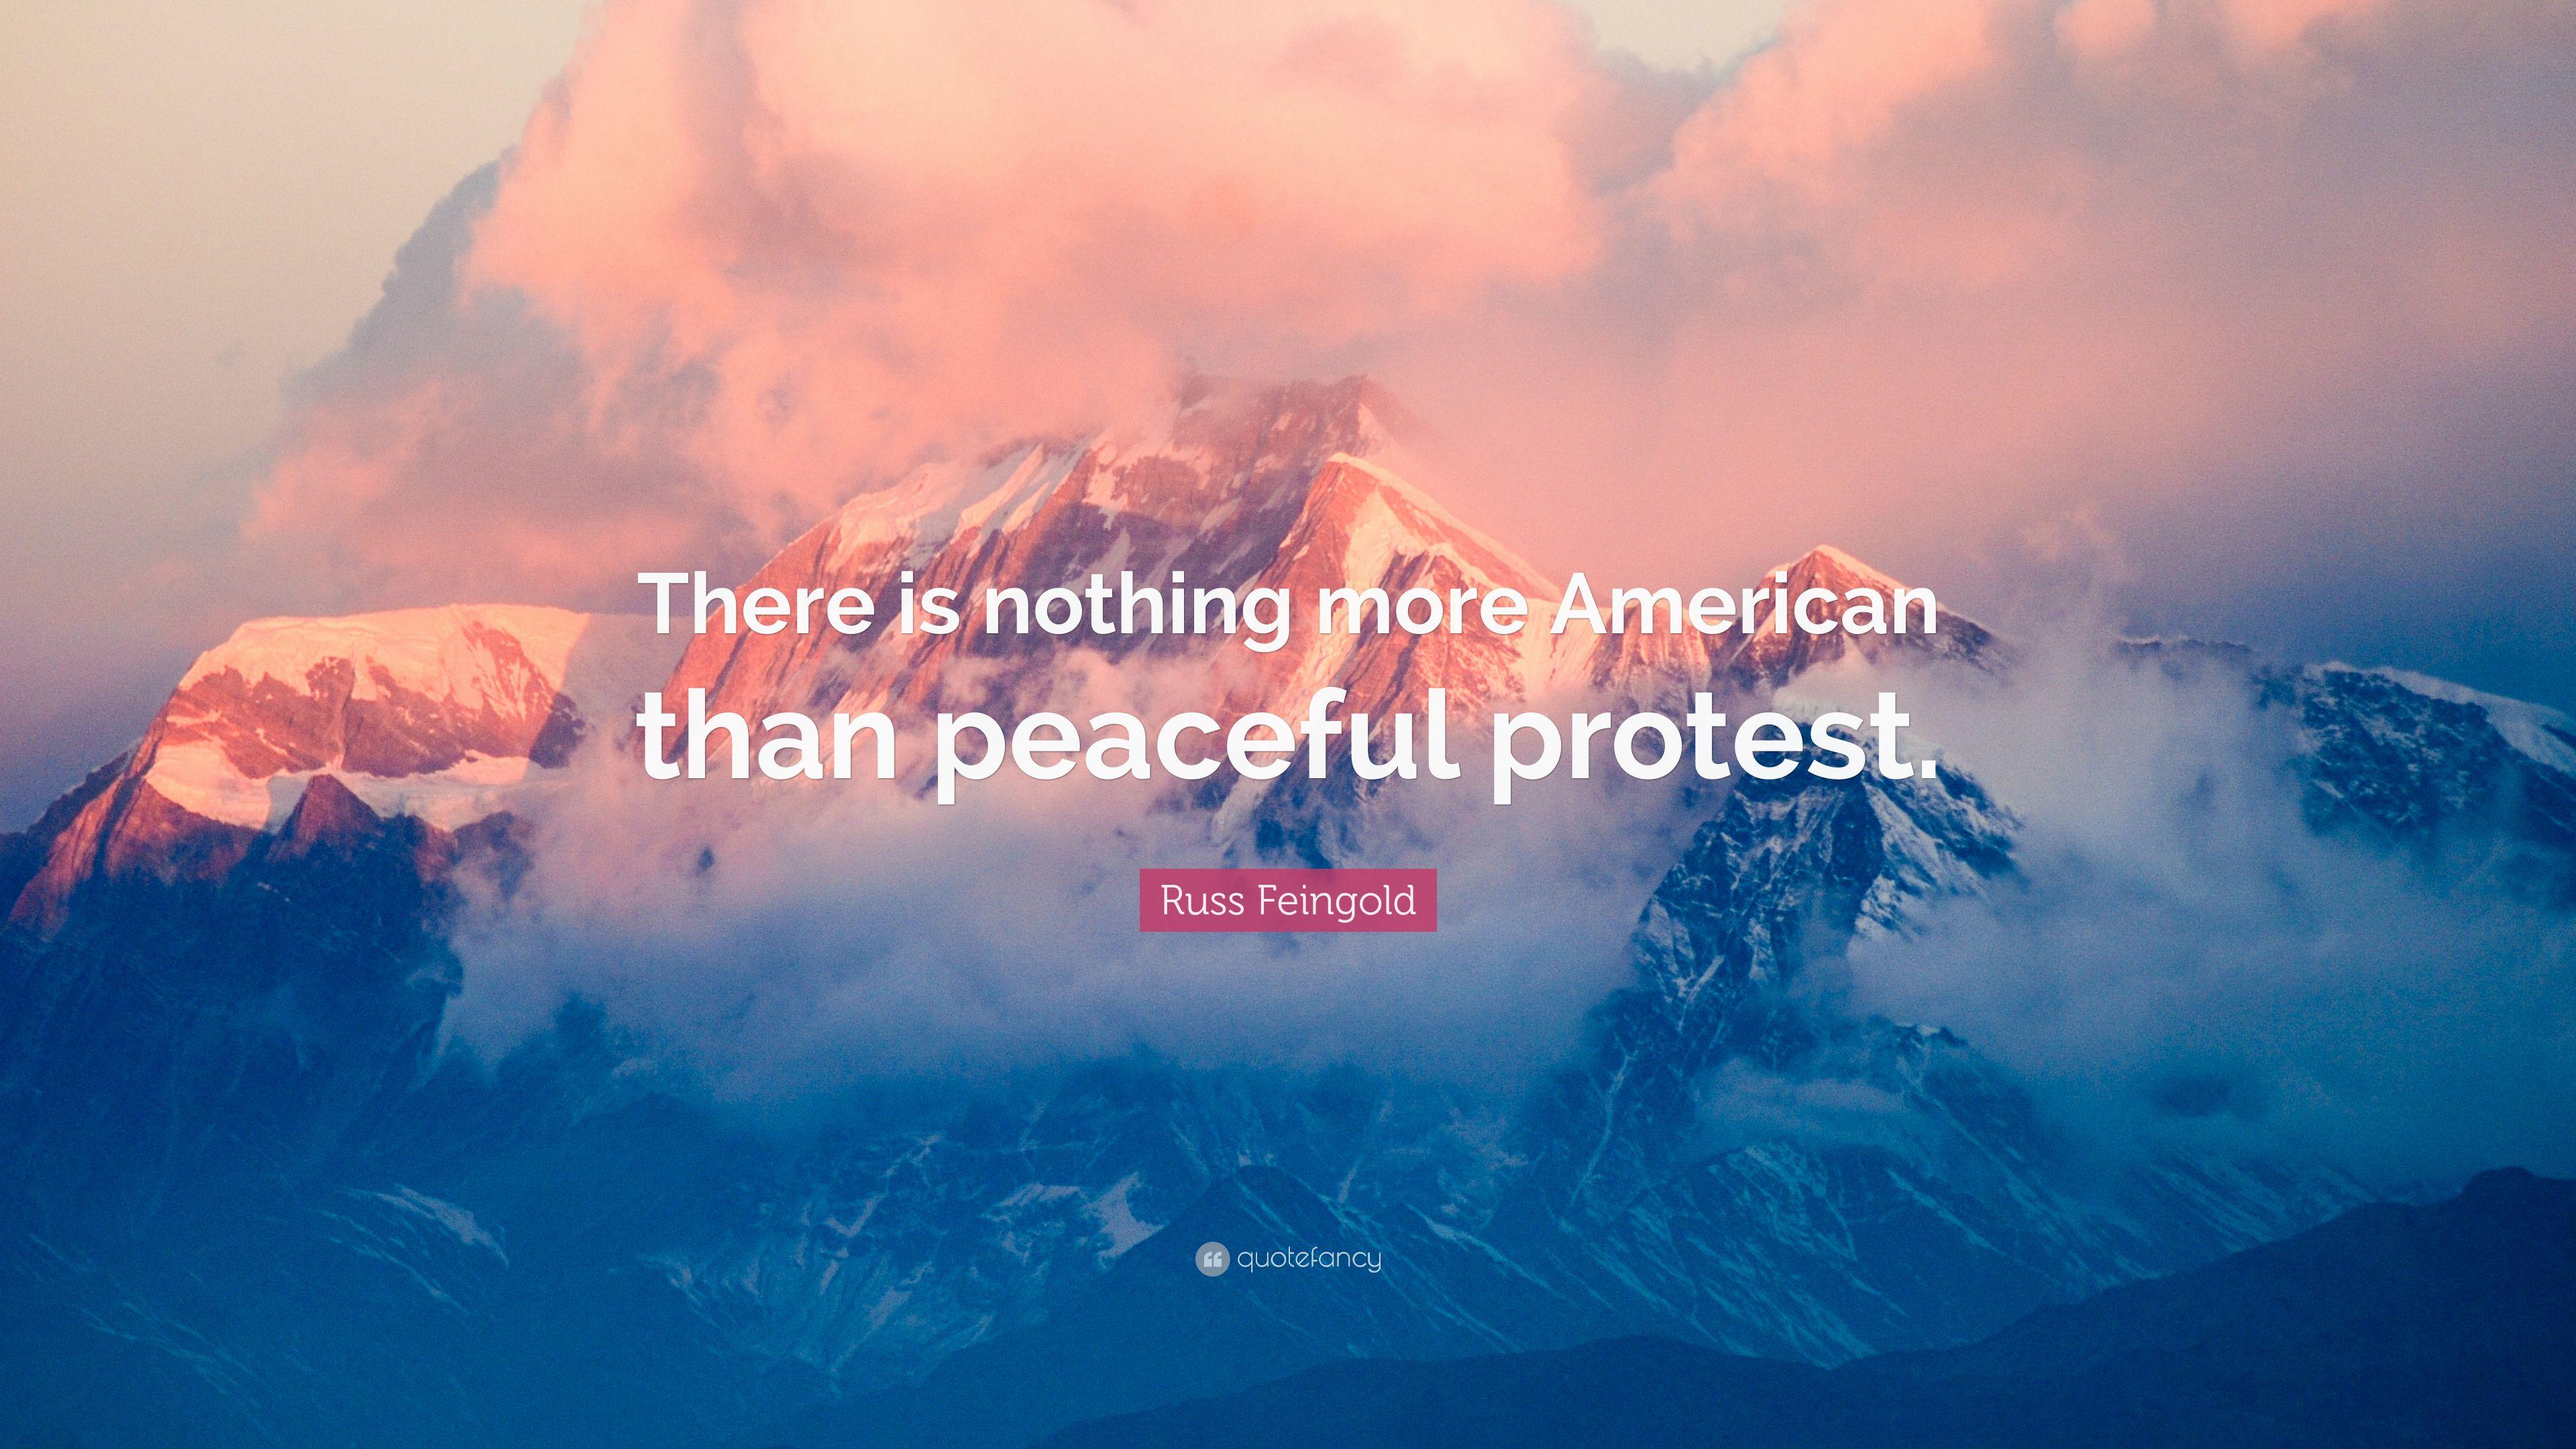 Russ Feingold Quote: “There is nothing more American than peaceful